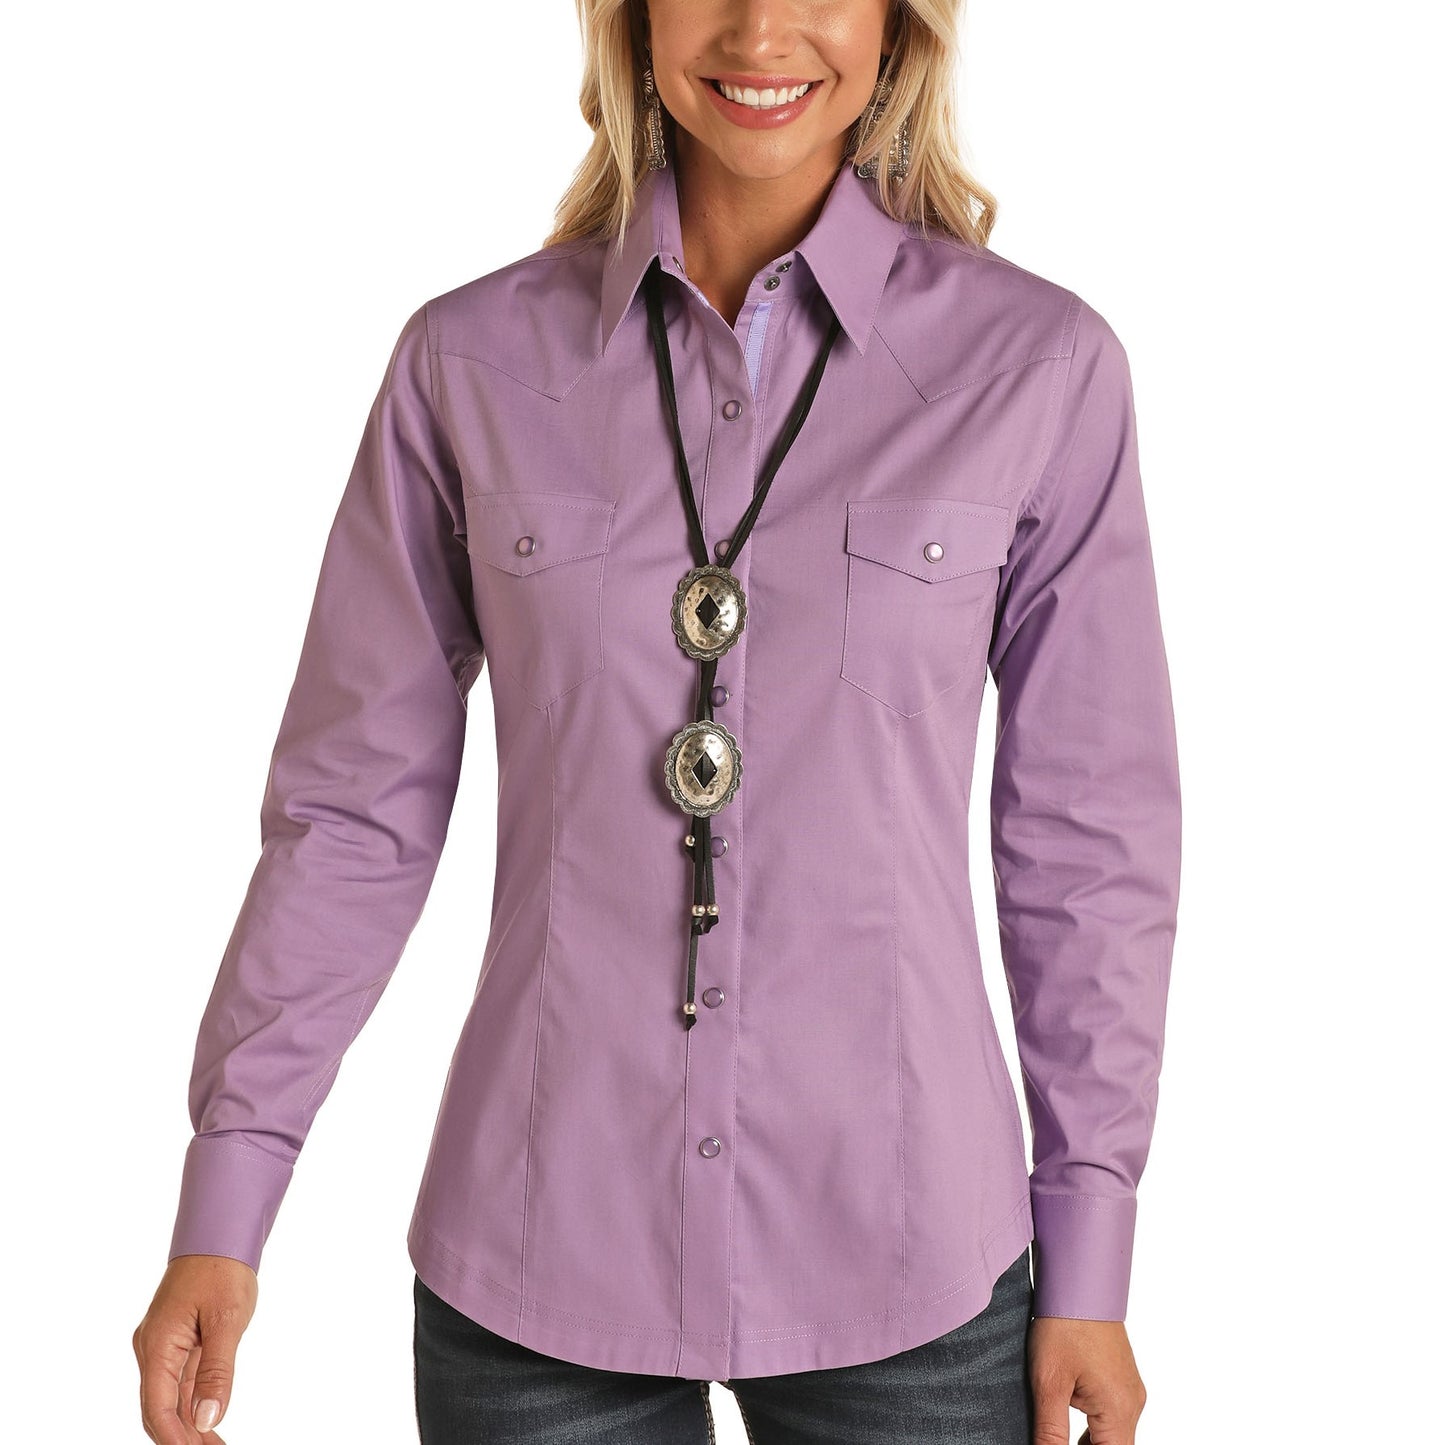 Panhandle Ladies Solid Stretch Violet Snap Shirt 22S8041-55